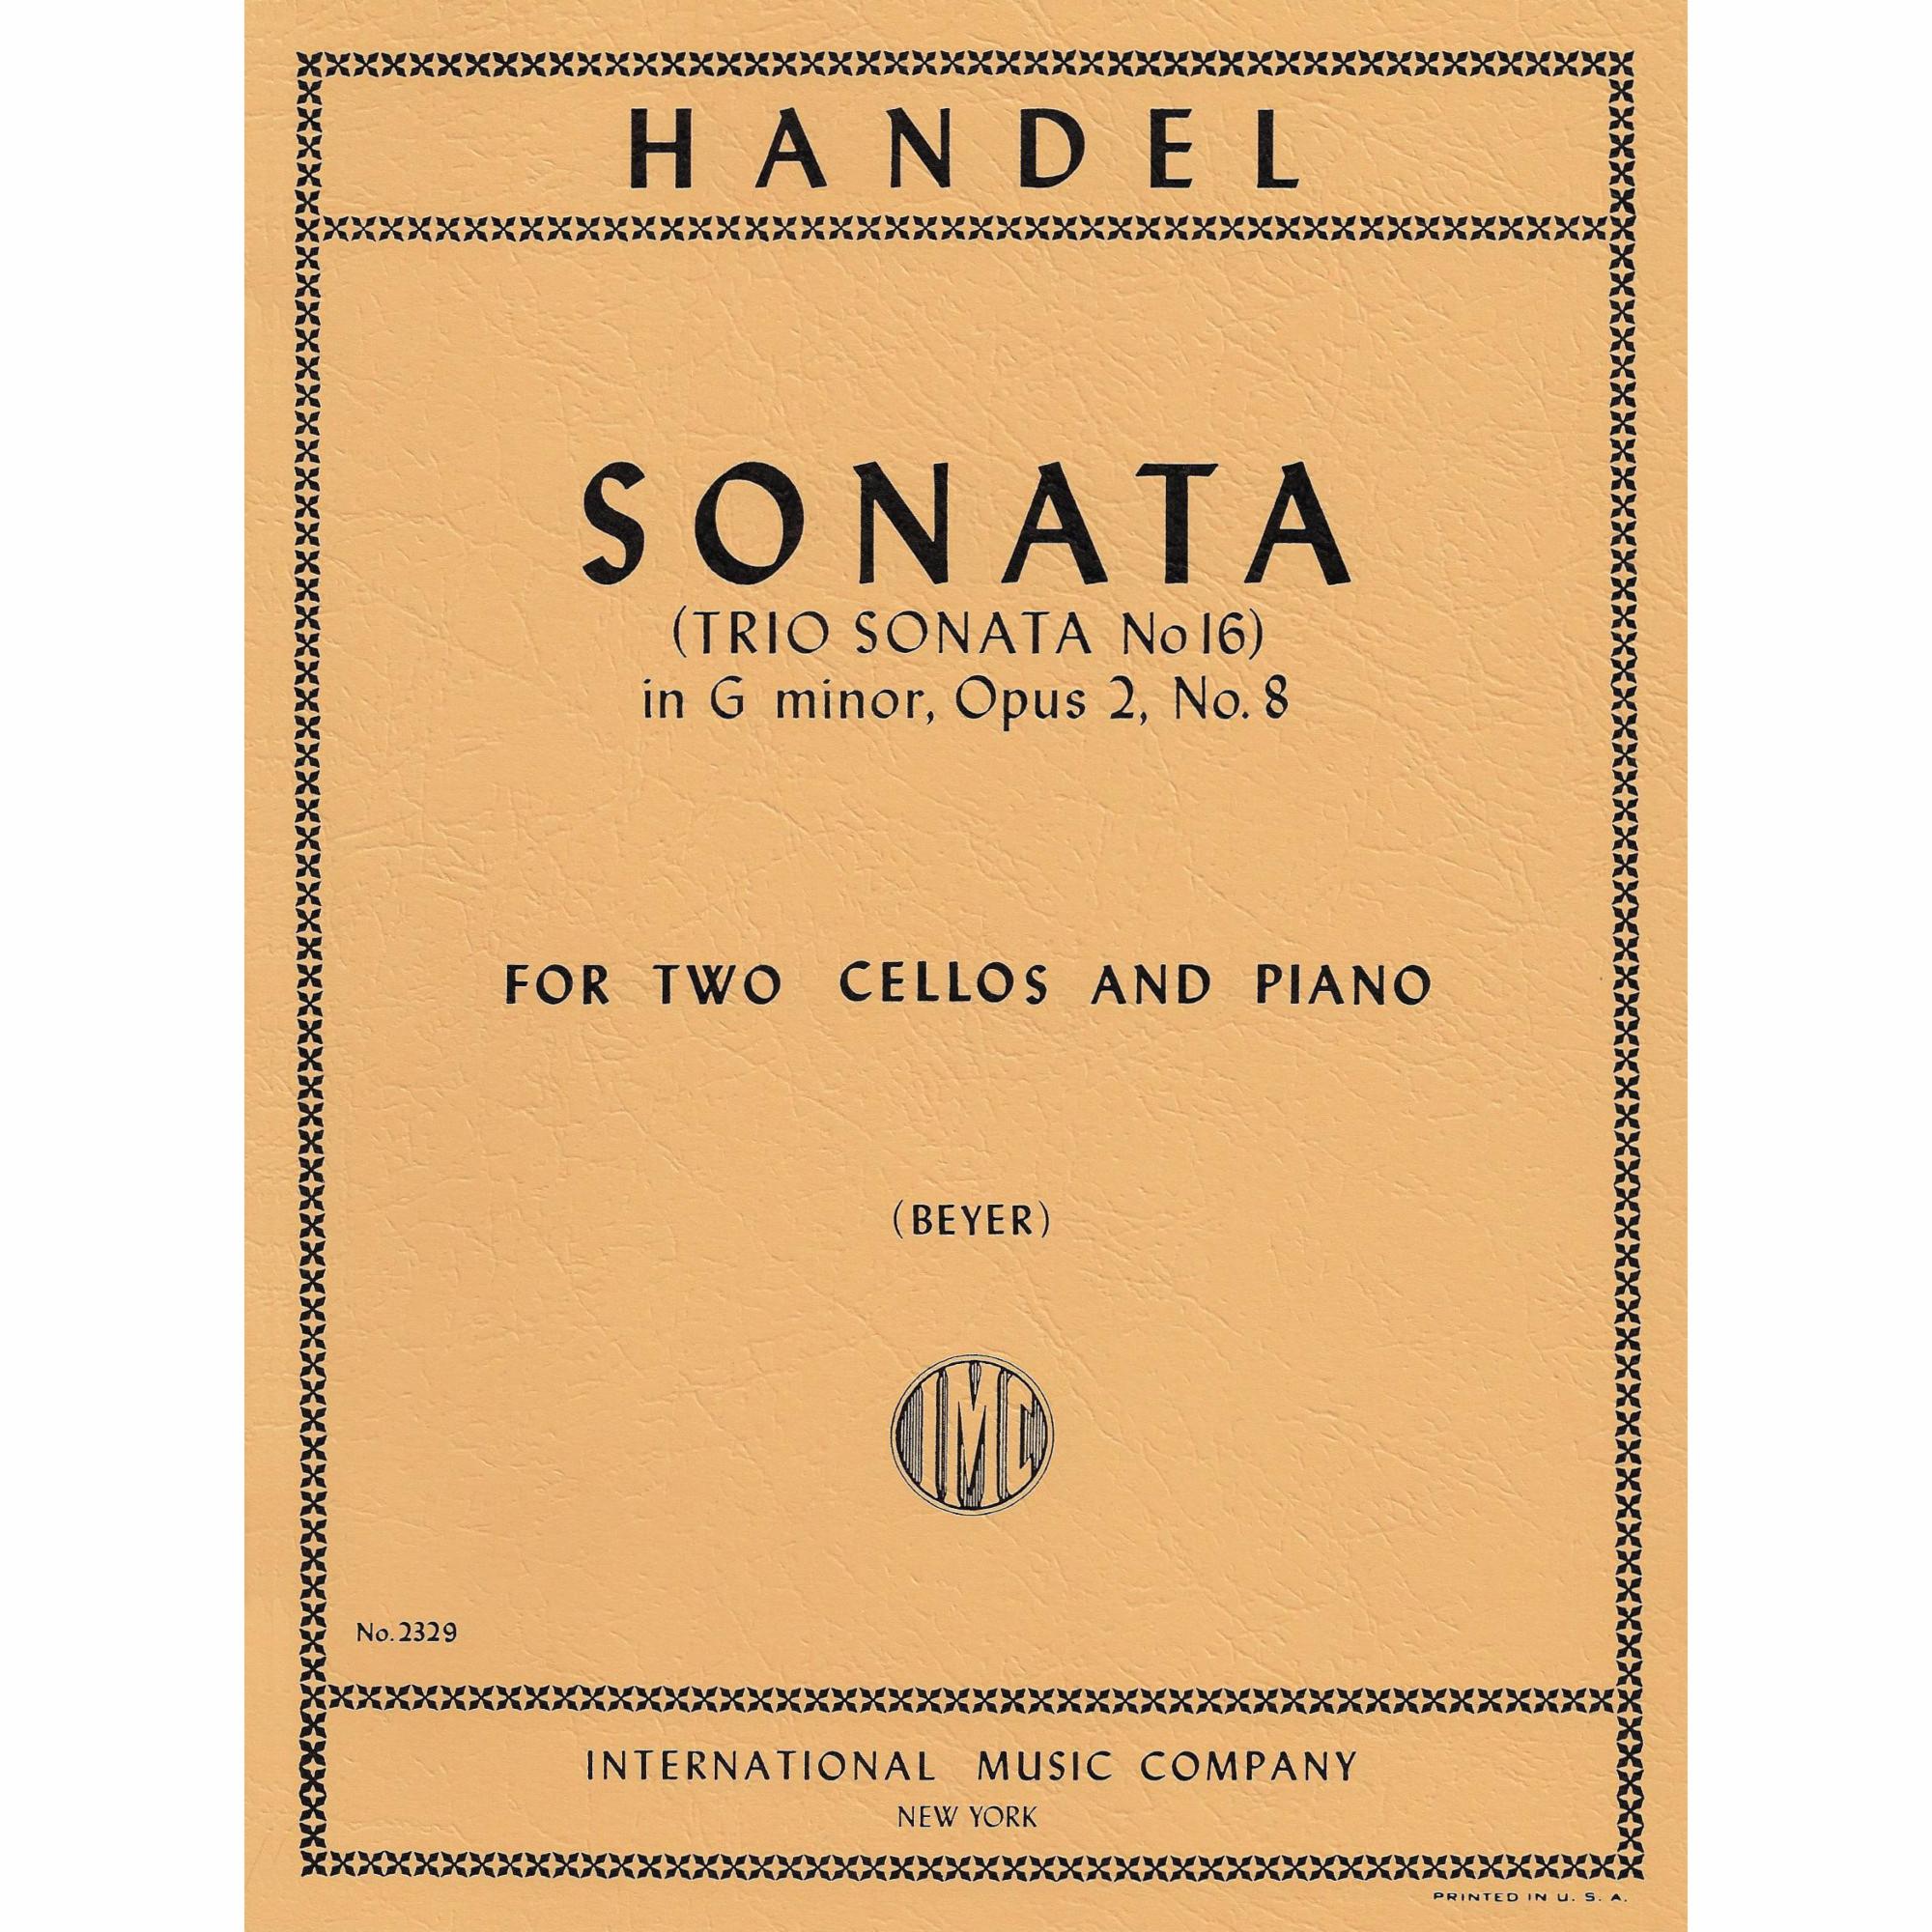 Handel -- Sonata in G Minor, Op. 2, No. 8 for Two Cellos and Piano